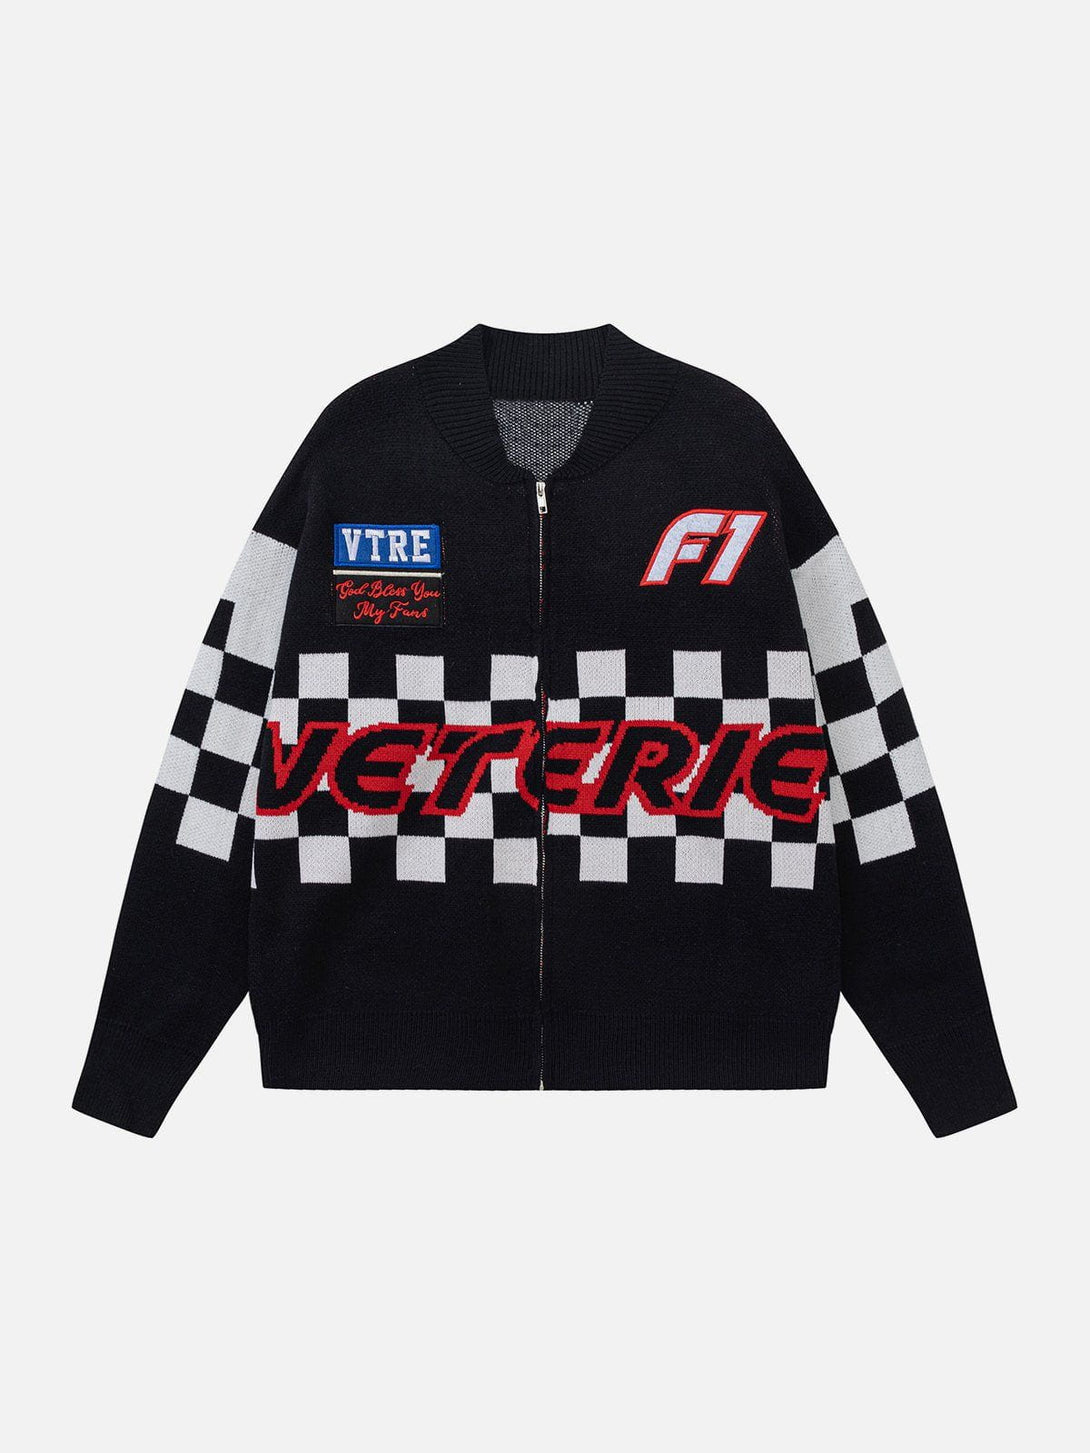 Levefly - Plaid With Gloves Racing Cardigan - Streetwear Fashion - levefly.com